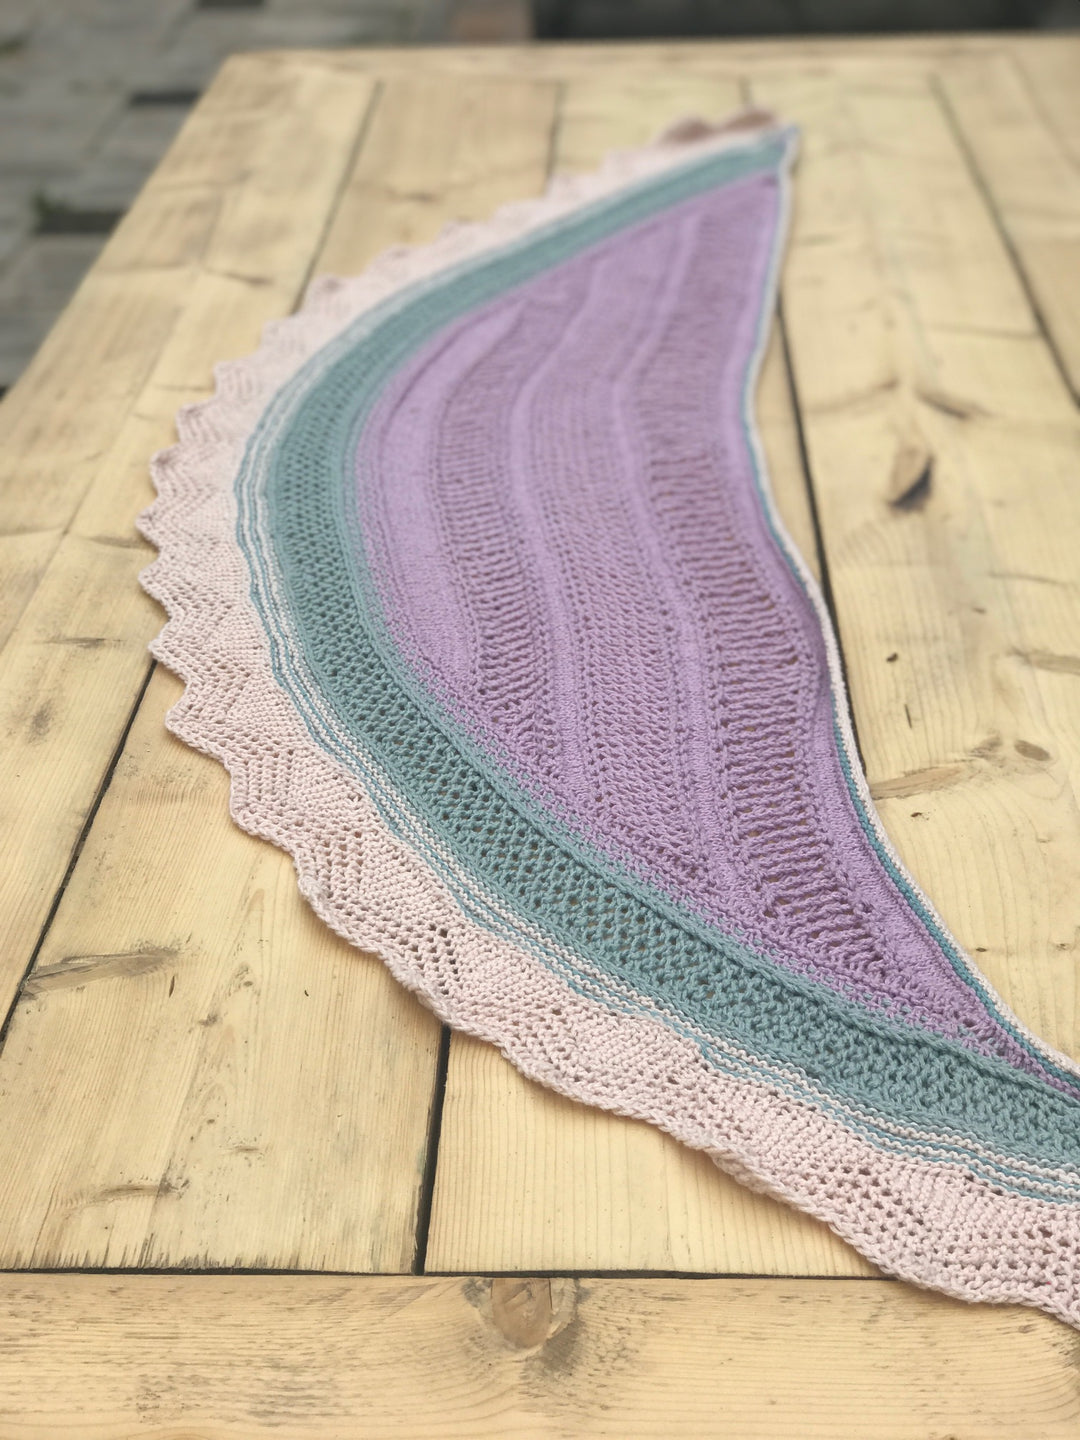 Lace-Tuch KAL2019 - Woche 9